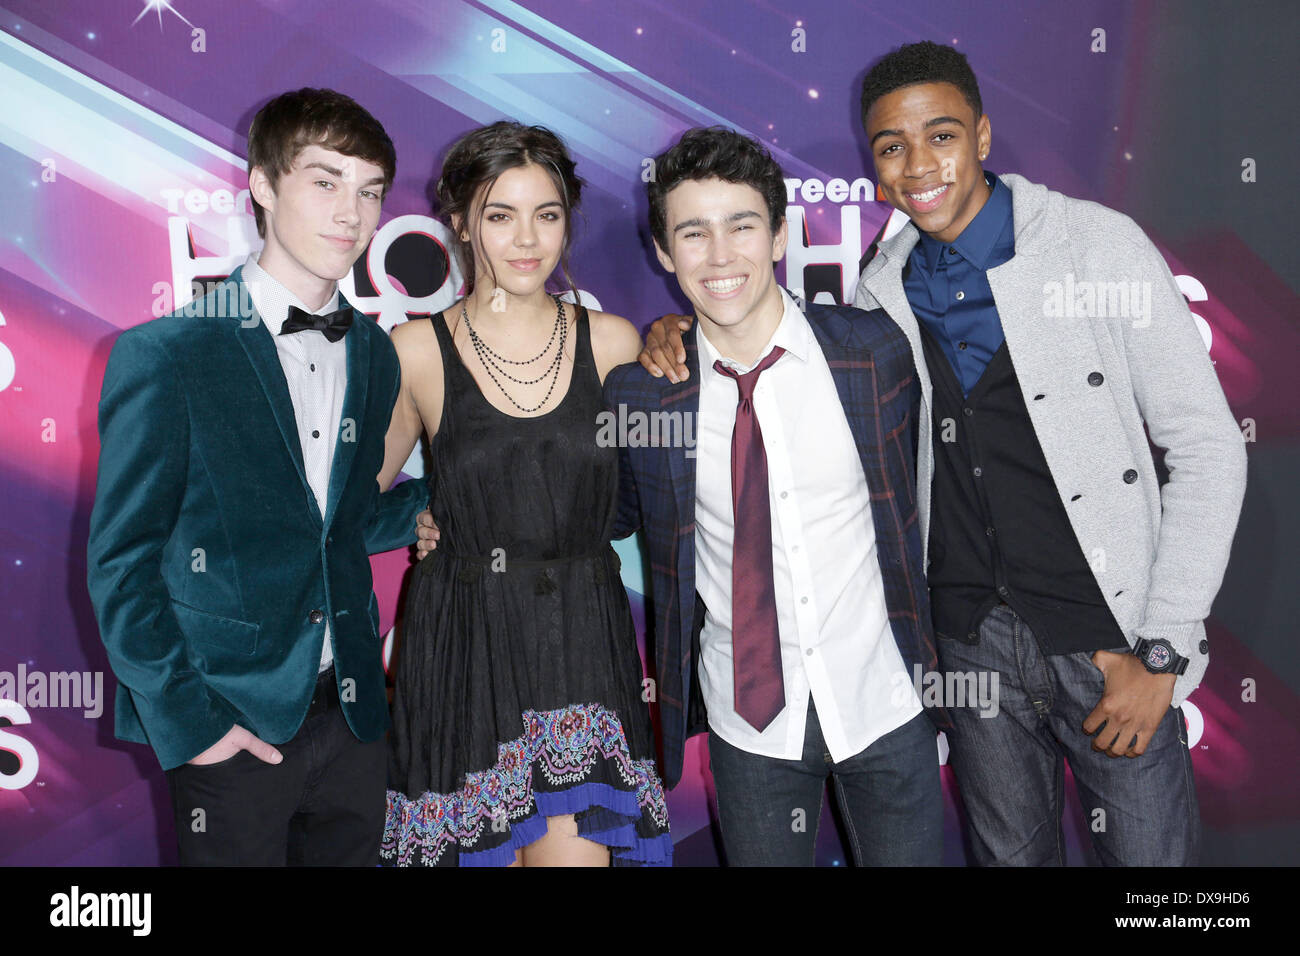 (L-R) Actors Noah Crawford, Samantha Boscarino, Max Schneider attends the Nickelodeon's 2012 TeenNick HALO Awards at Hollywood Palladium in Hollywood Featuring: (L-R) Actors Noah Crawford,Samantha Boscarino,Max Schneider Where: California, United States When: 17 Nov 2012 Stock Photo